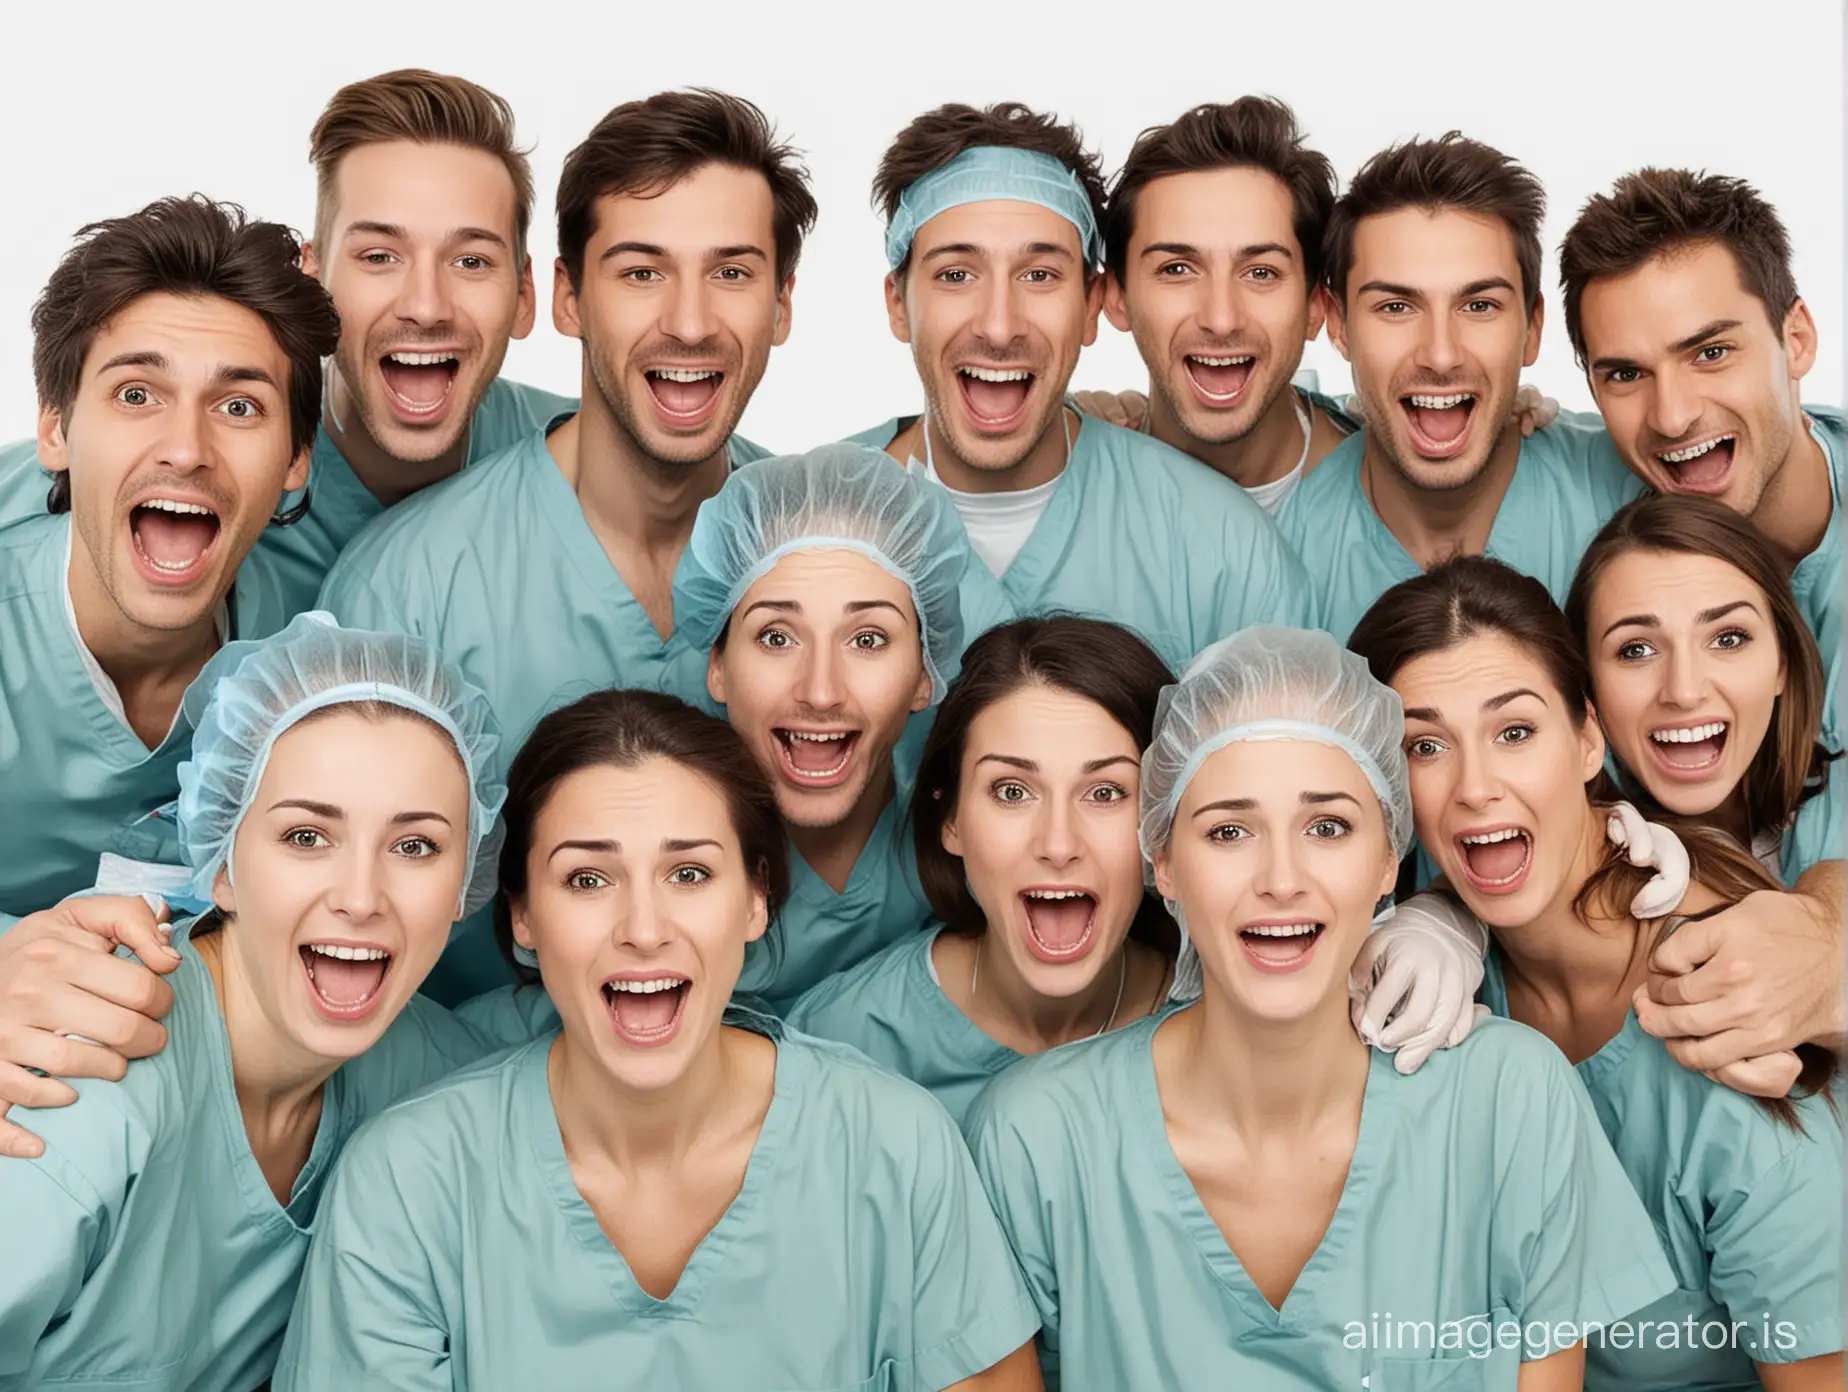 two groups of people, one has anesthesiologists and are just a few, the other one are common people in great number, the first group is scared and the second is happy. White background